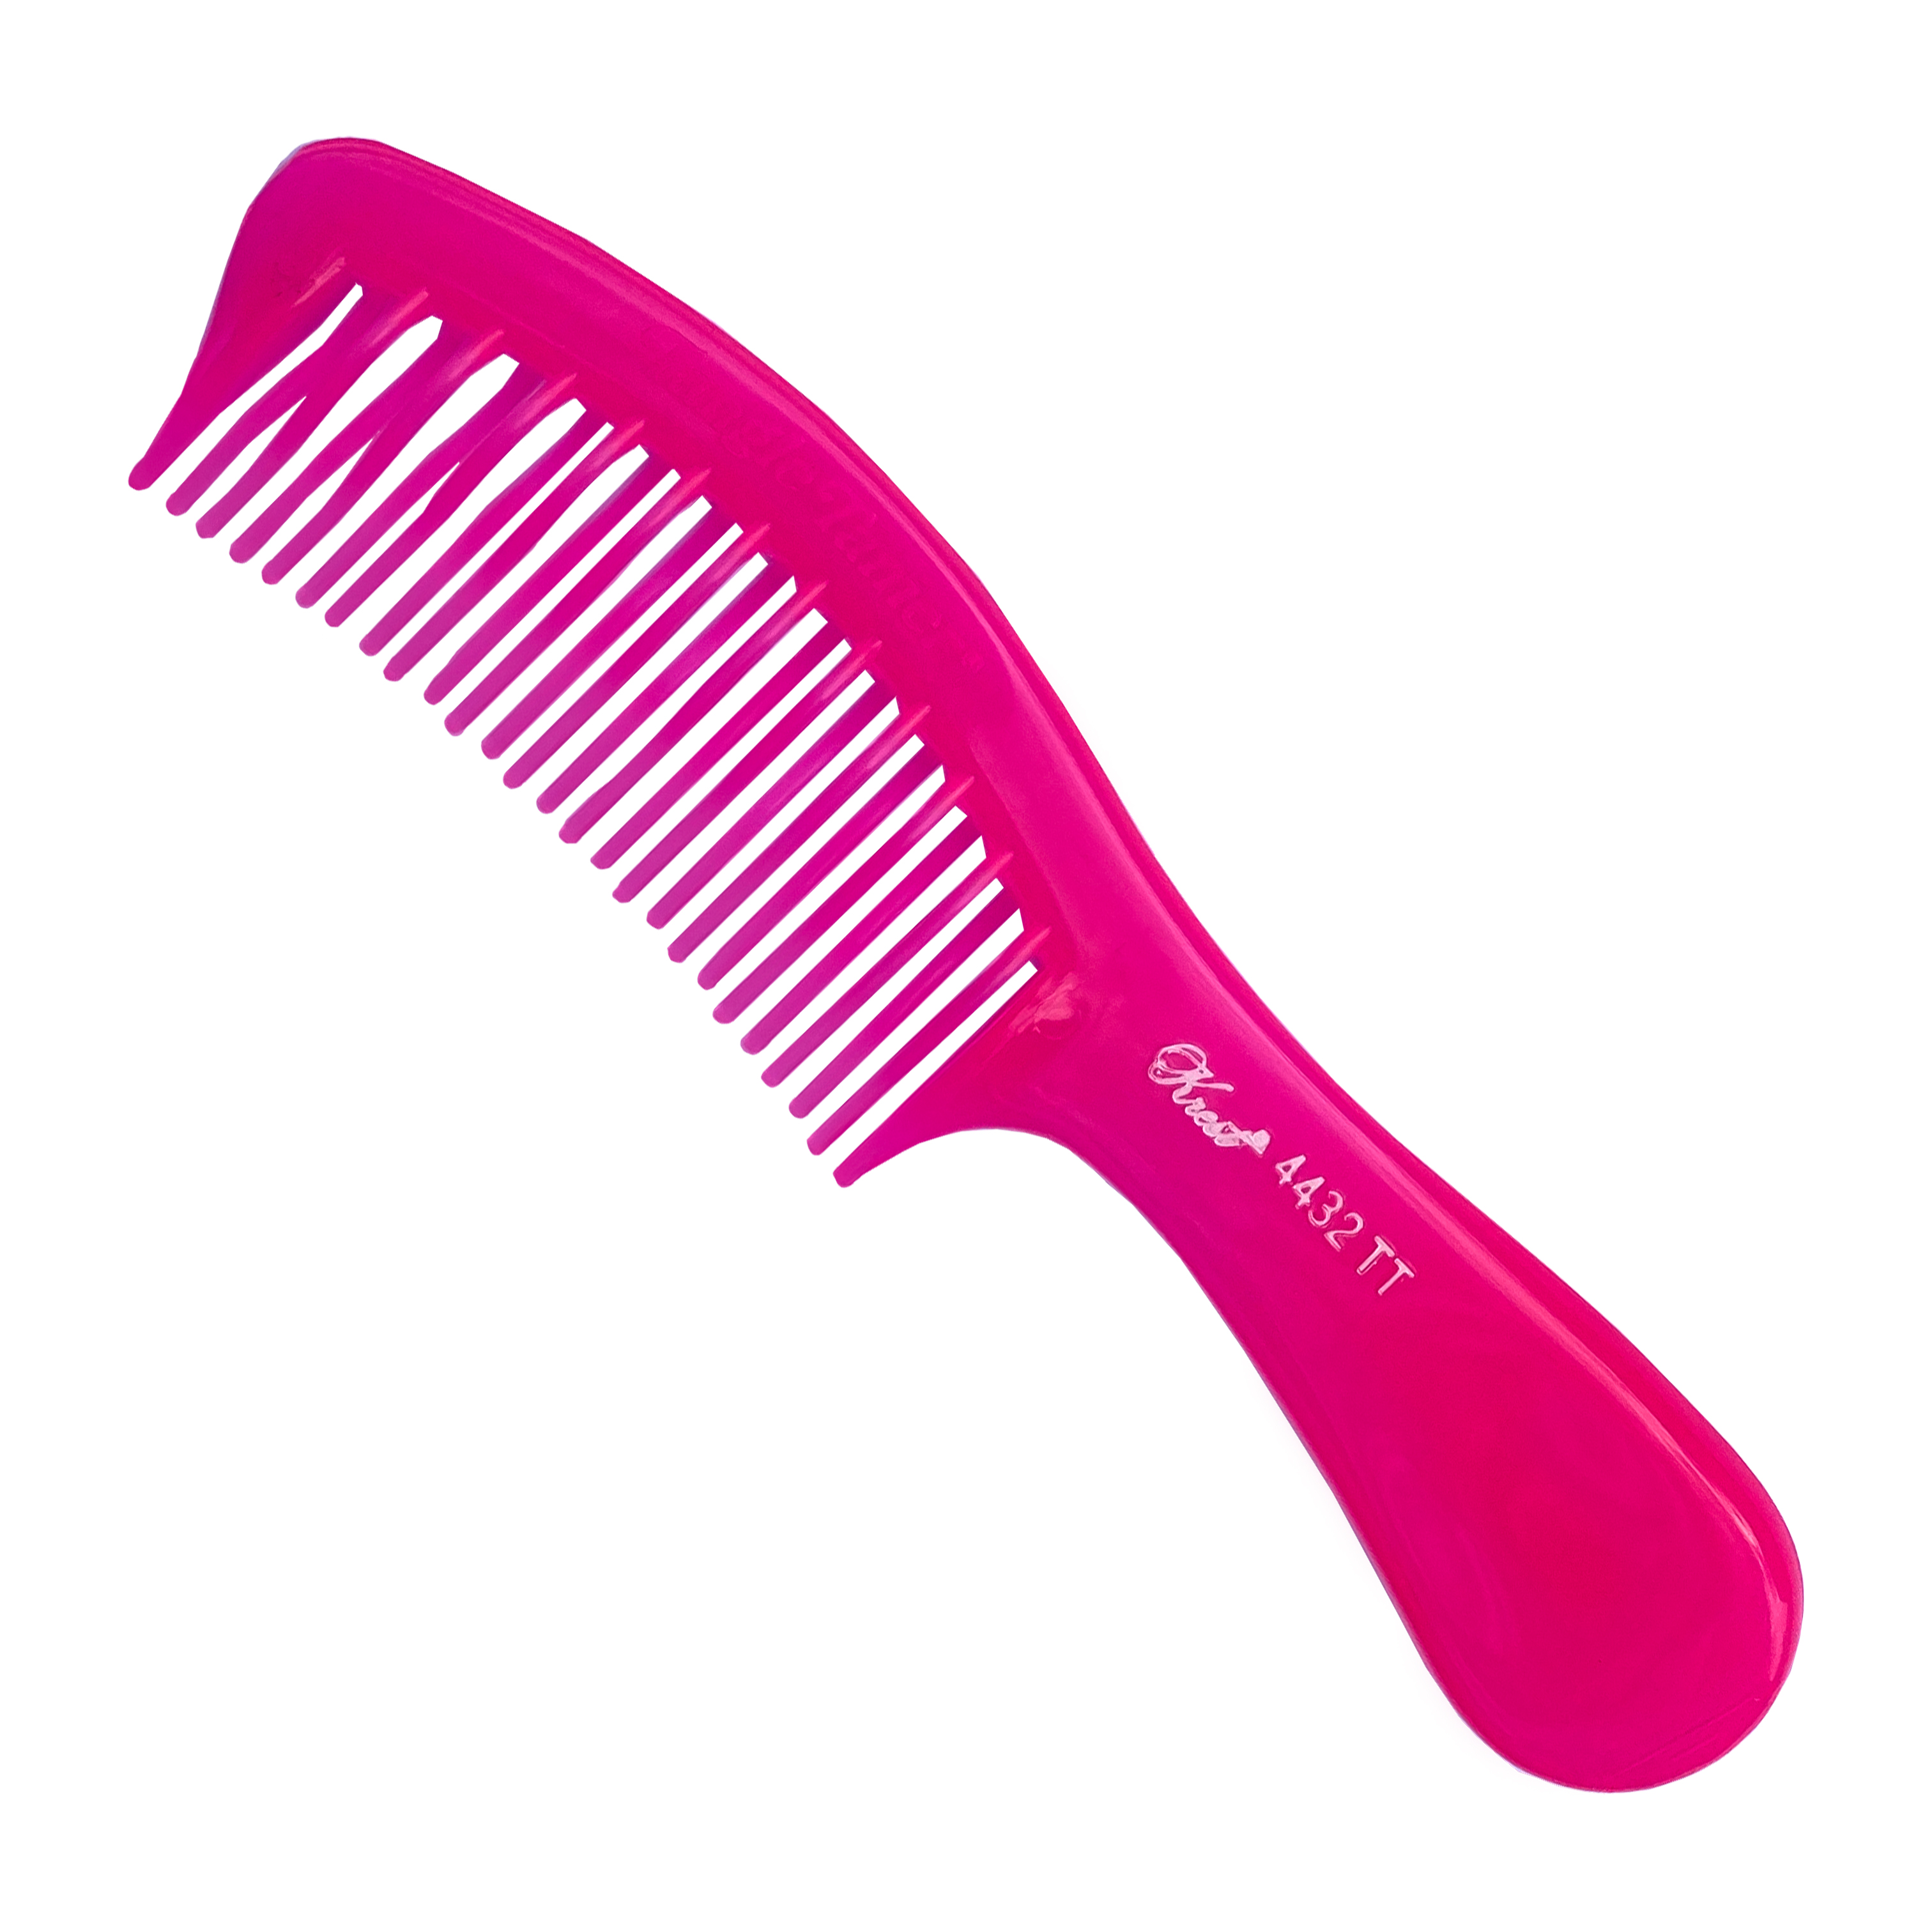 Curved tooth detangling comb